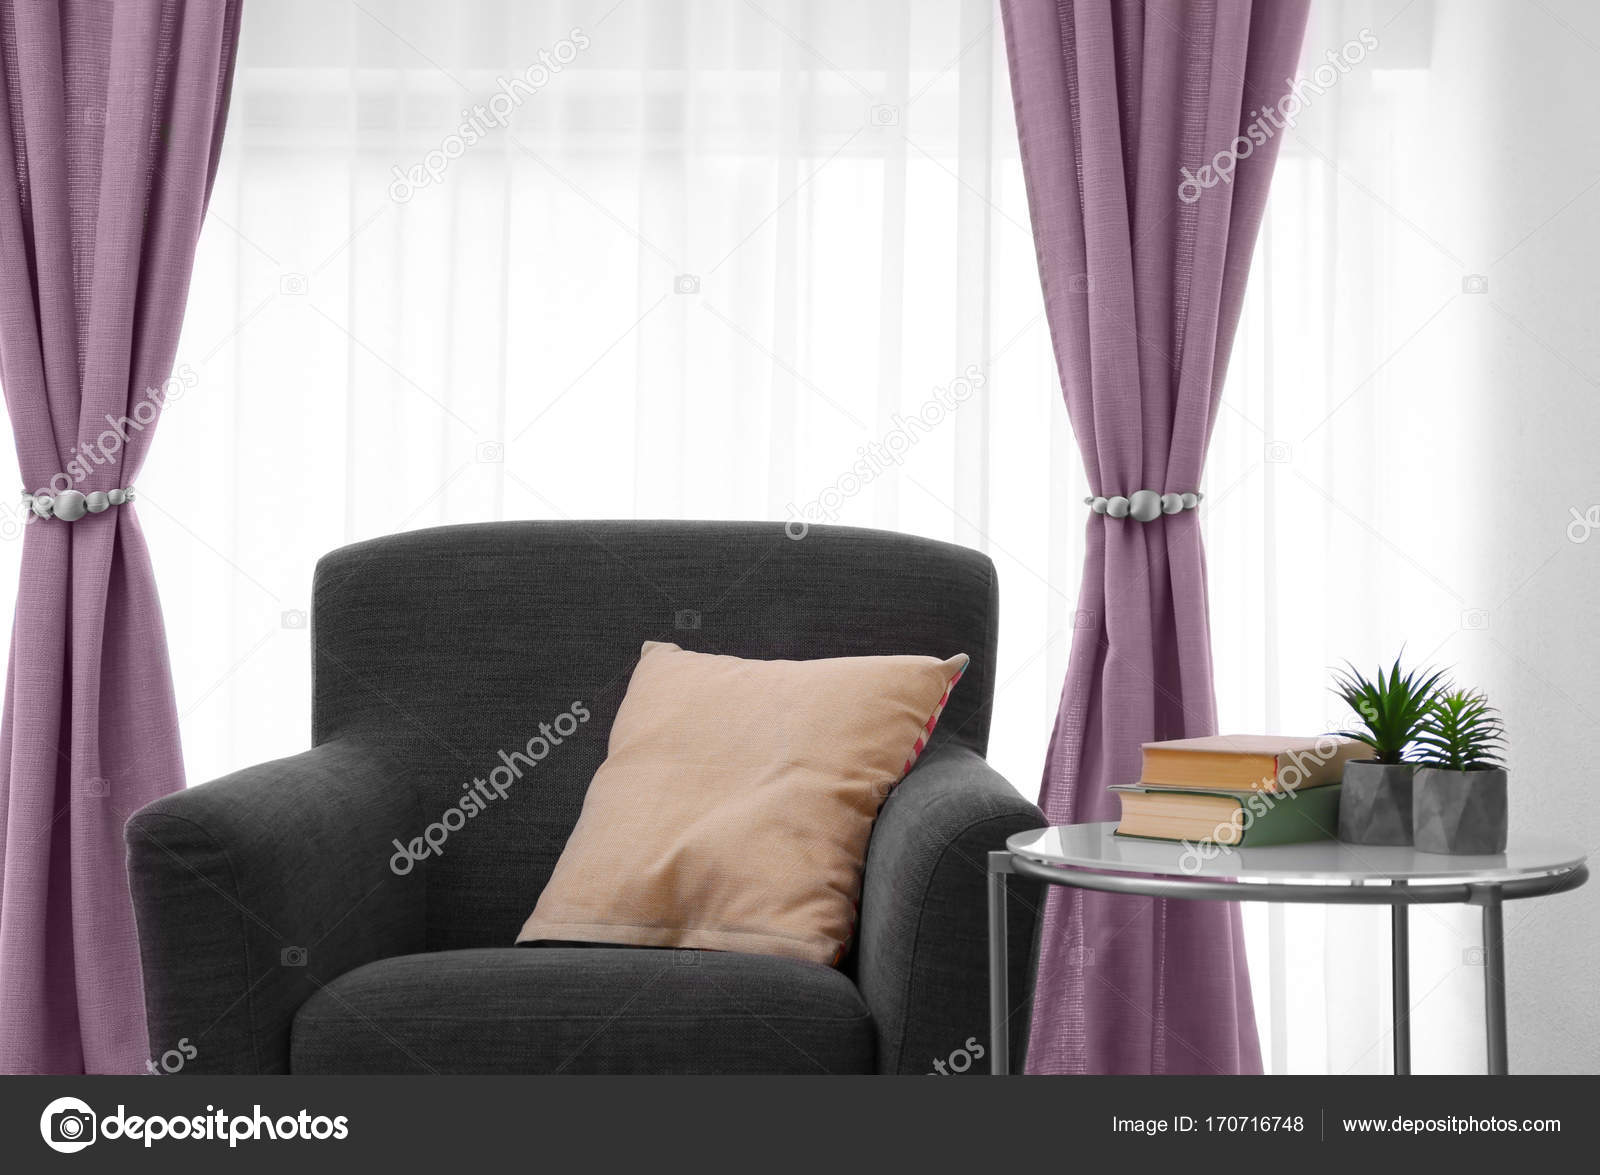 Room Interior With Beautiful Curtains Stock Photo Belchonock 170716748